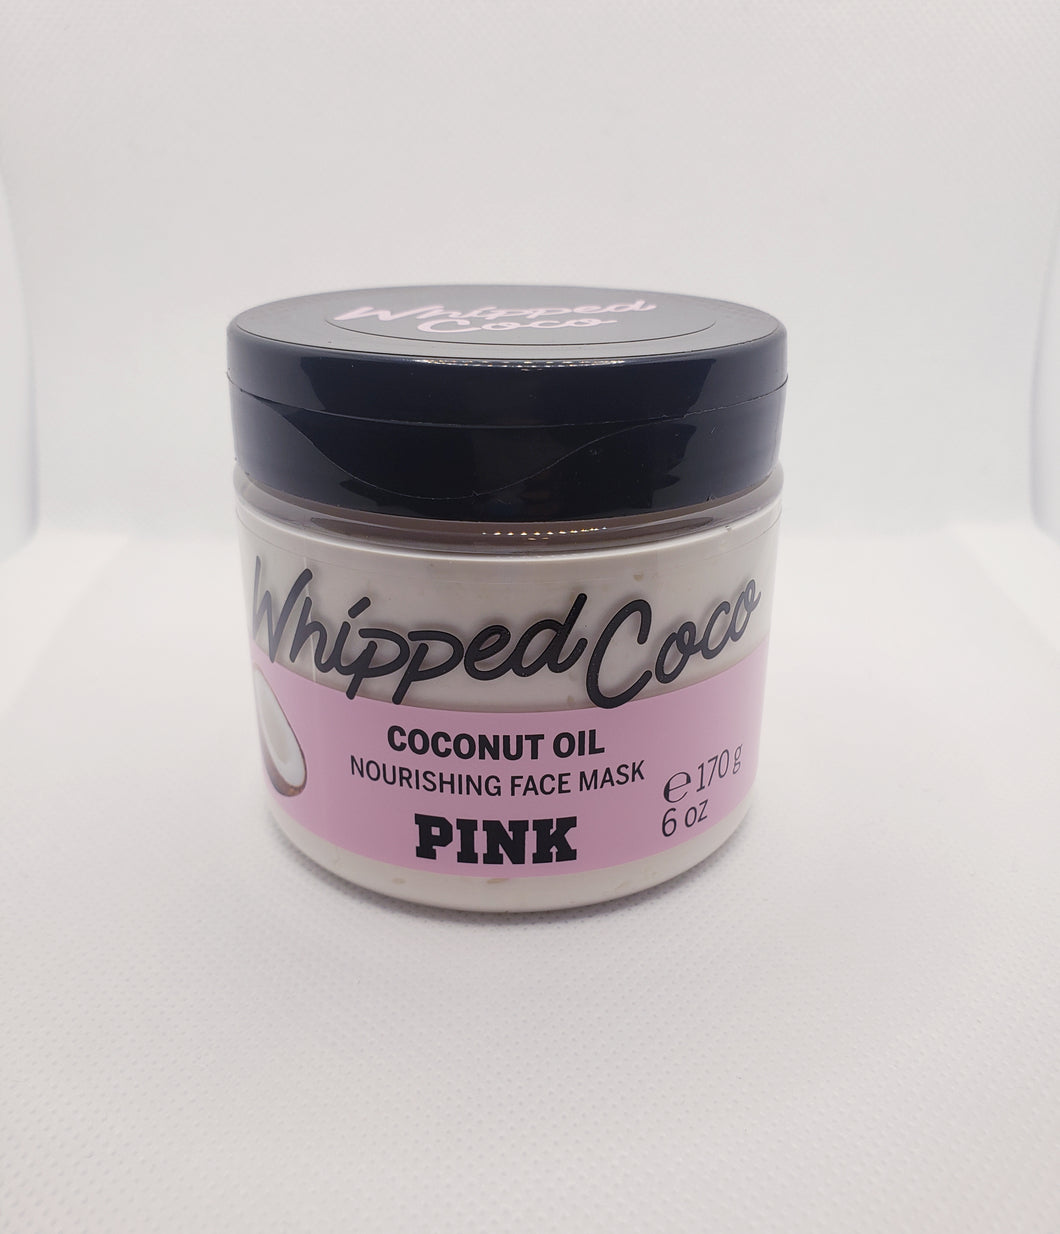 Victoria's Secret PINK Coco Whip Face Mask REVIEW